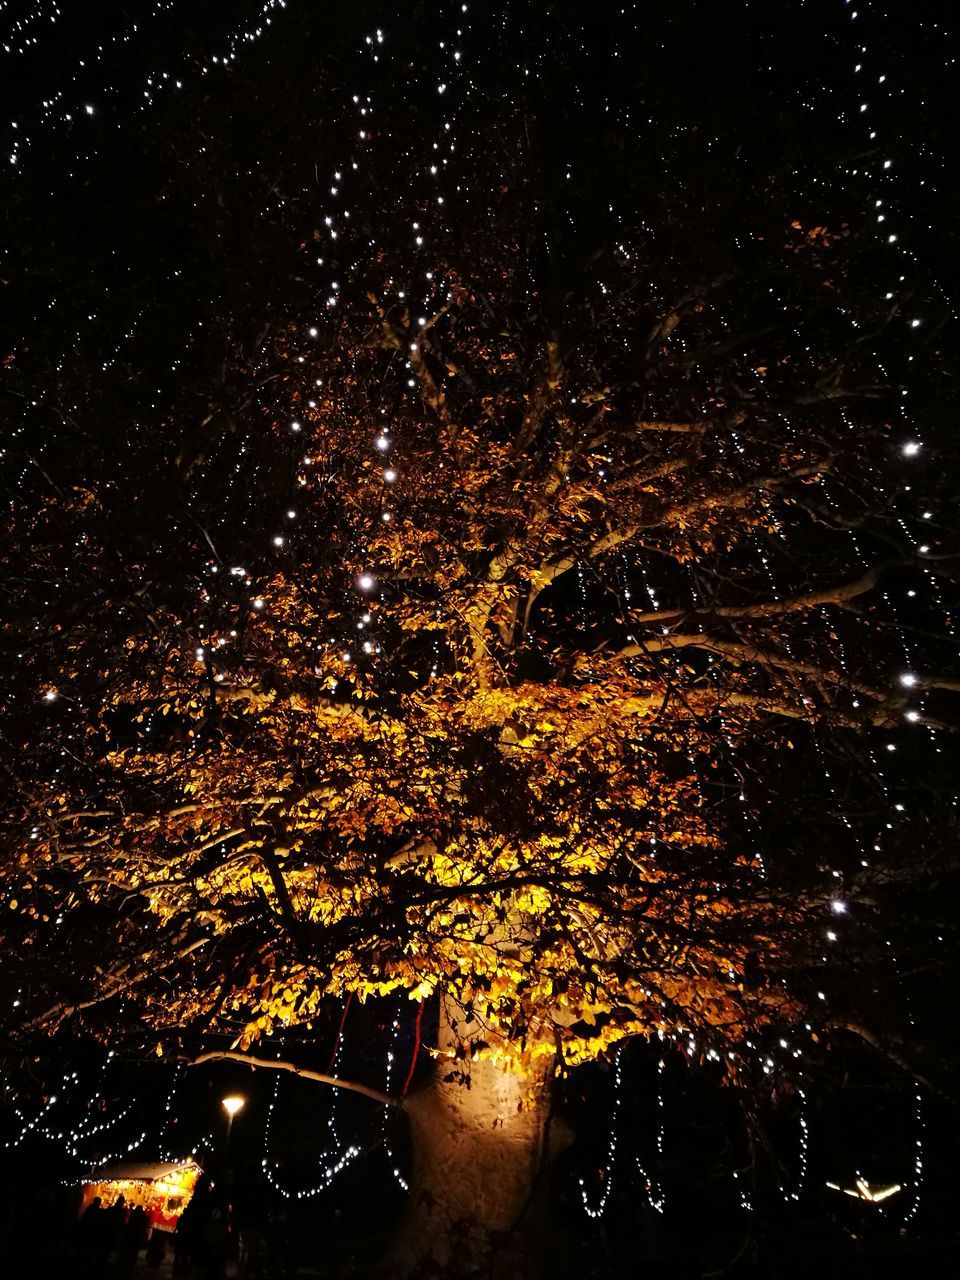 night, tree, no people, outdoors, beauty in nature, nature, close-up, sky